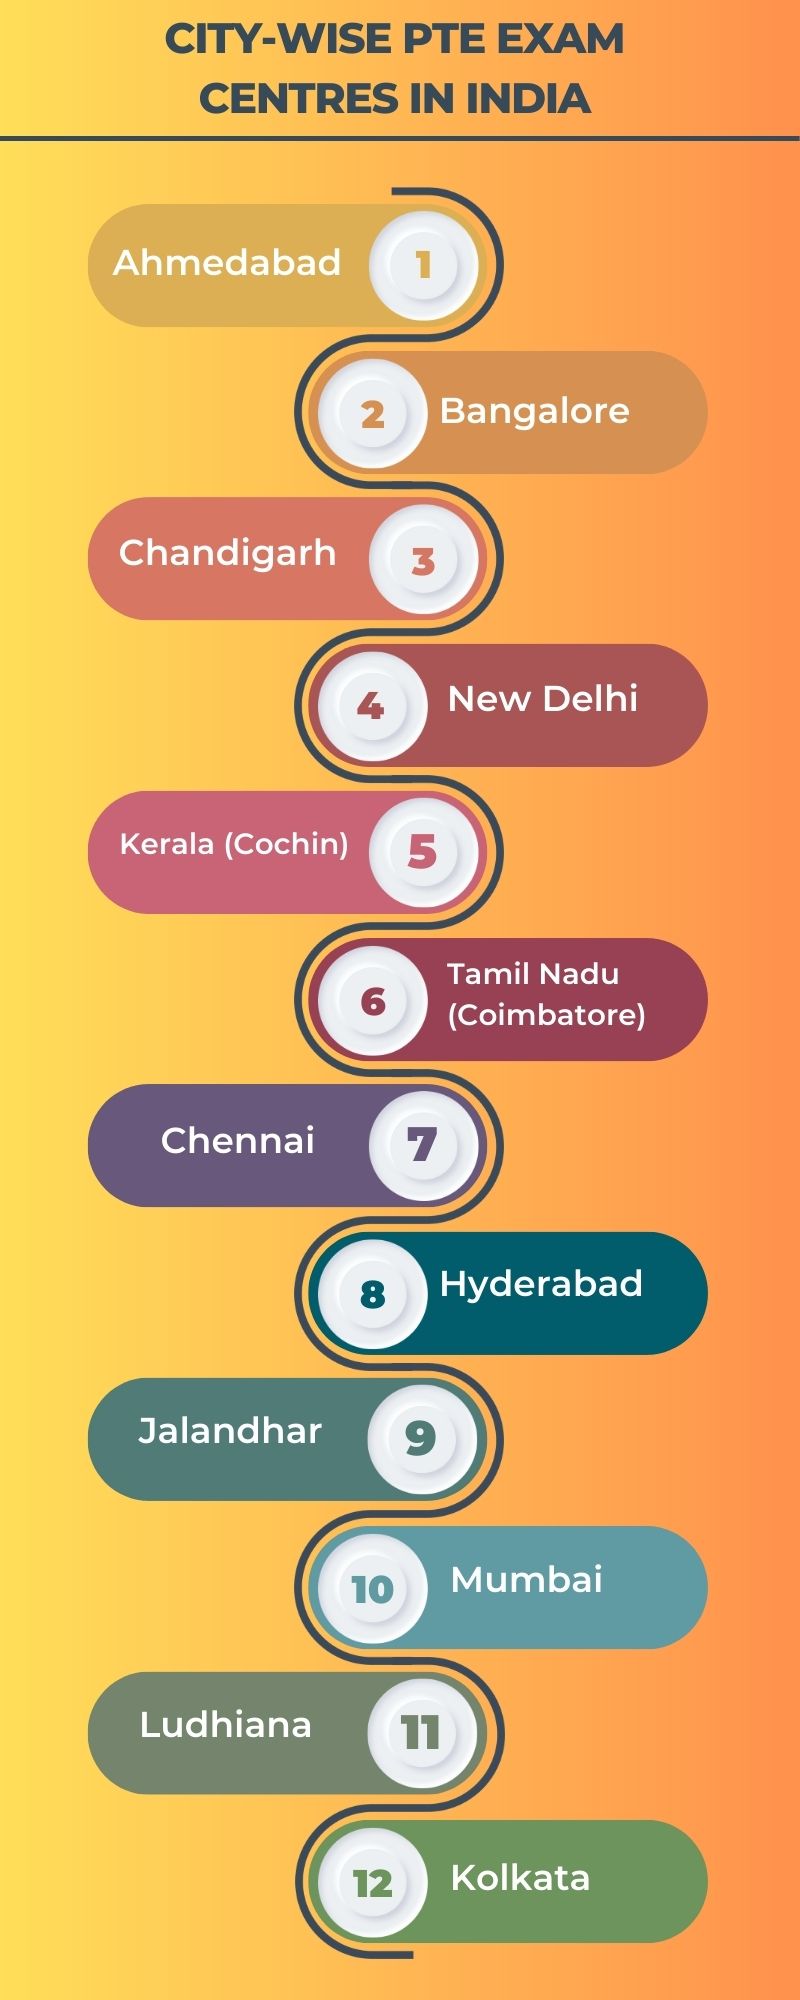 PTE Test centers in India 2023 list with a yello and orange color gradient background